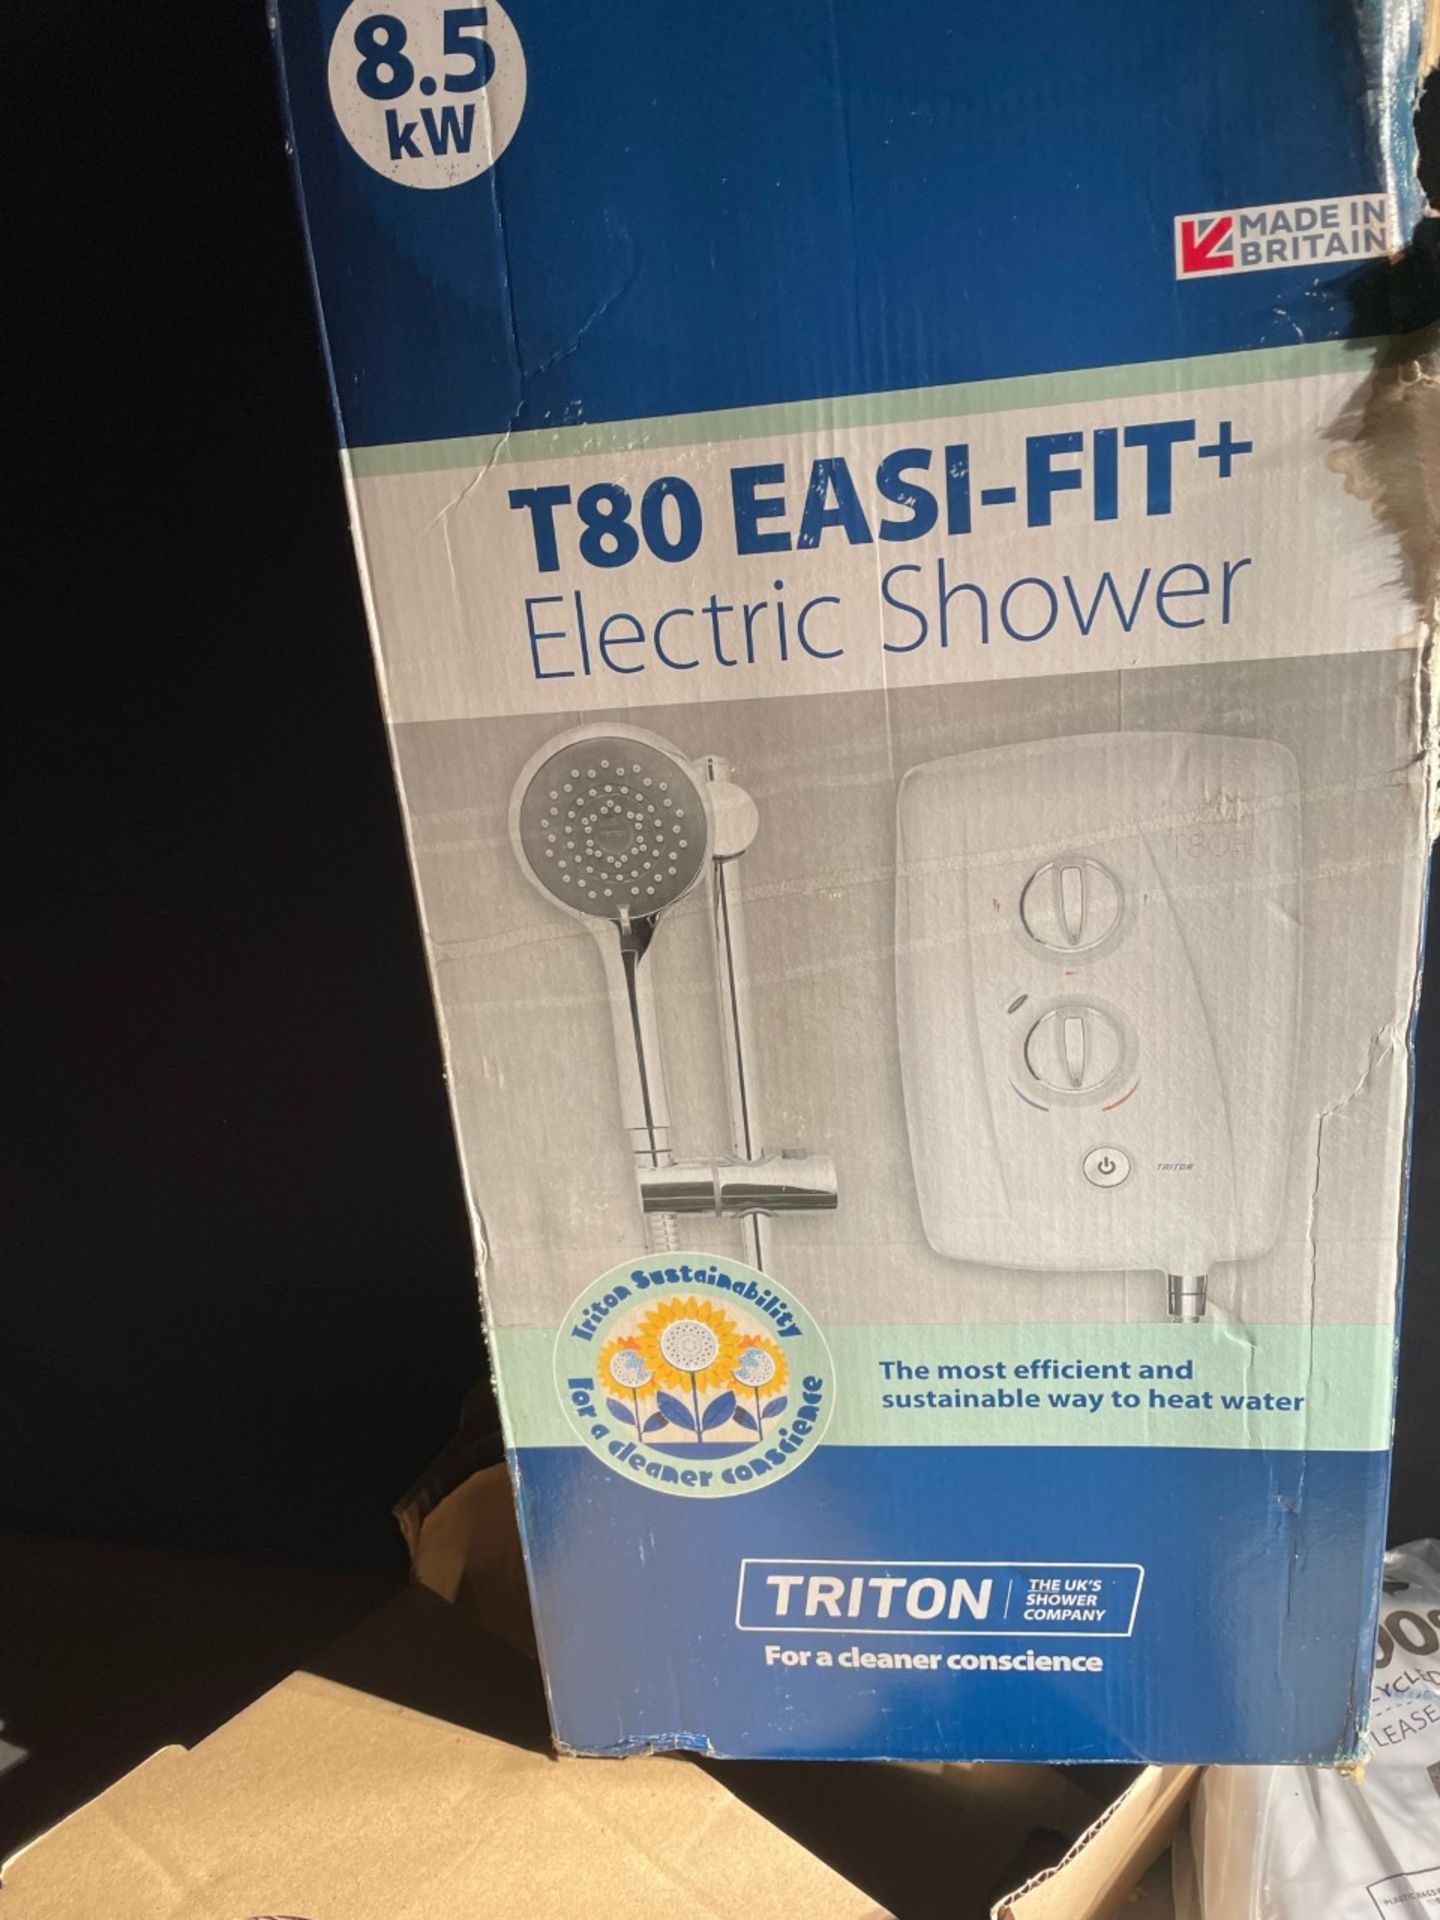 T80 easy fit 8.5kw electric shower. Unit is new, box is damaged. Working order unknown